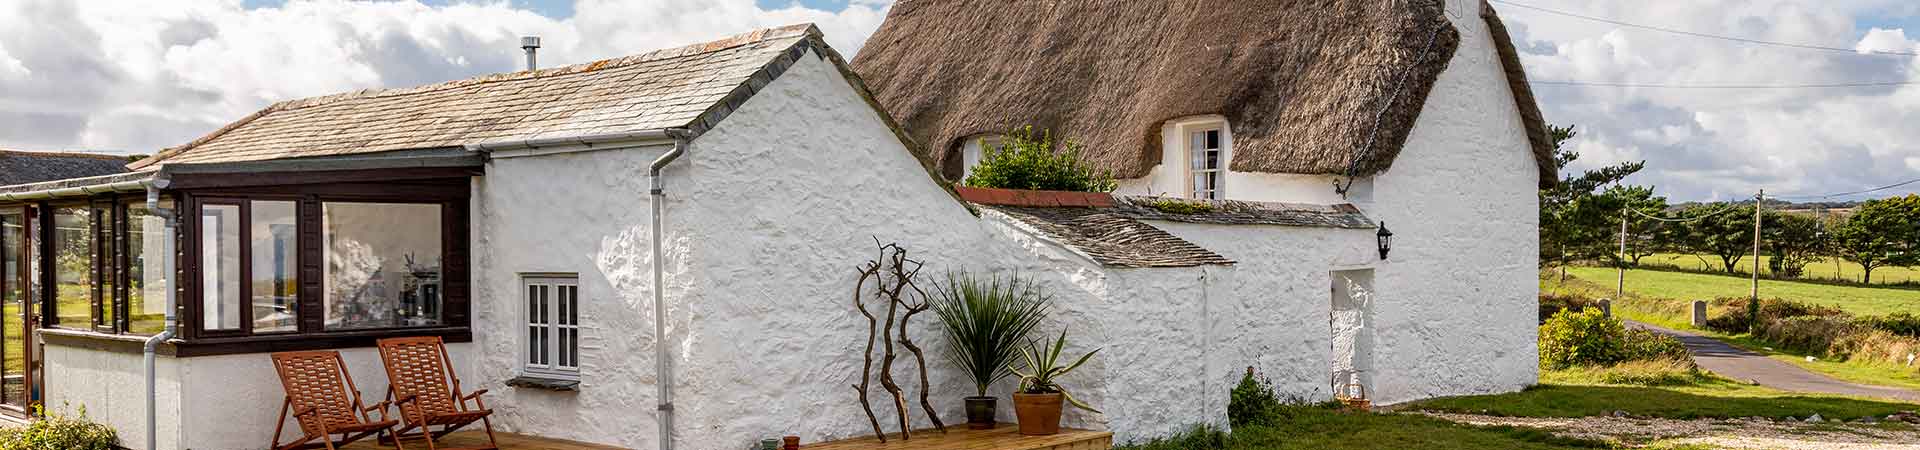 Thatched holiday cottages in Sussex